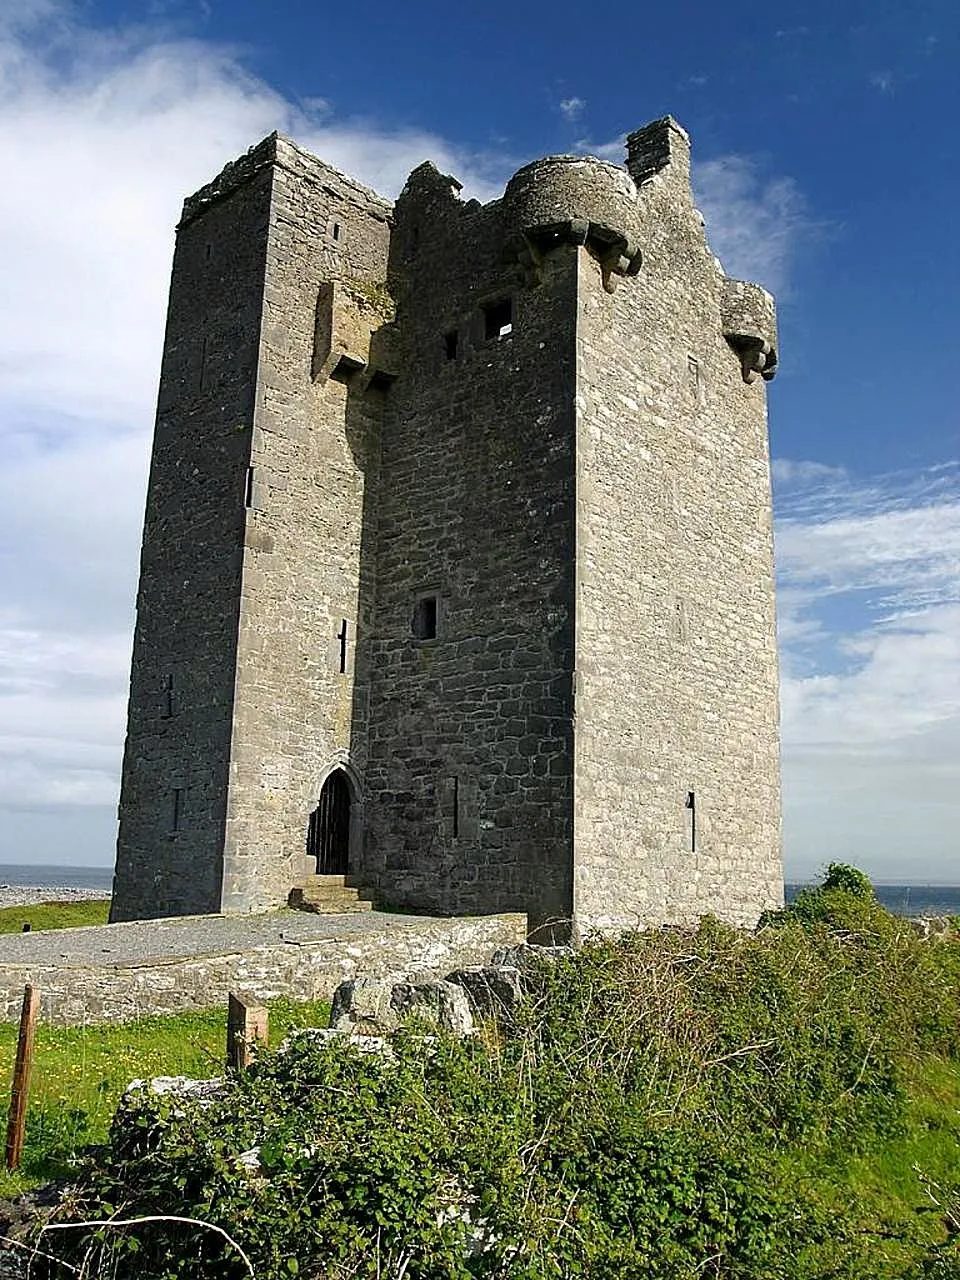 Photo showing: Image title: Gleninagh castle on hill
Image from Public domain images website, http://www.public-domain-image.com/full-image/architecture-public-domain-images-pictures/castles-public-domain-images-pictures/gleninagh-castle-on-hill.jpg.html